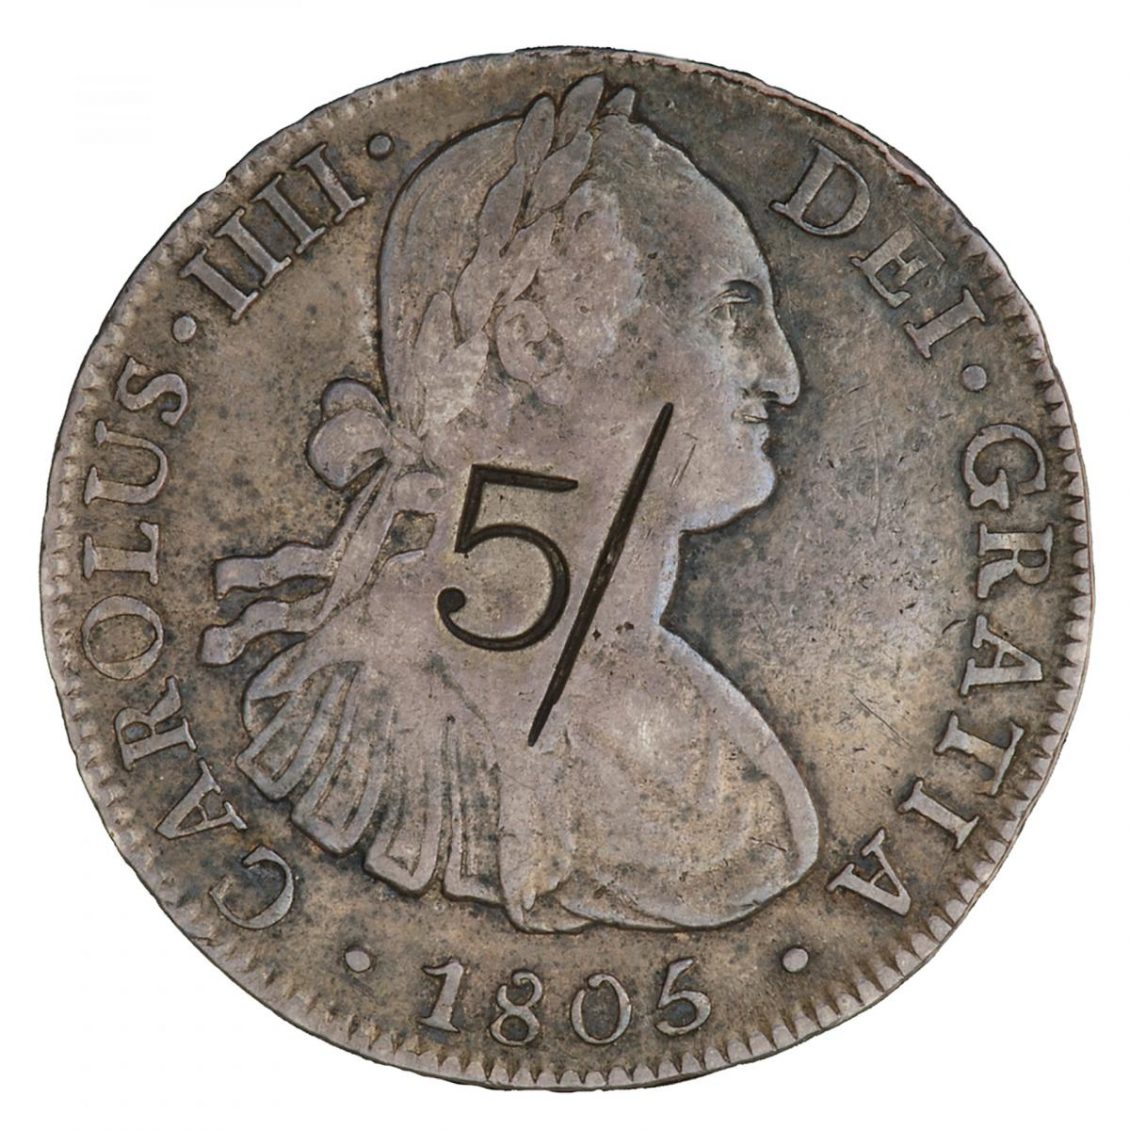 Coin, old, silver, profile of man with laurel leaves in hair and a number 5 stamped over top.